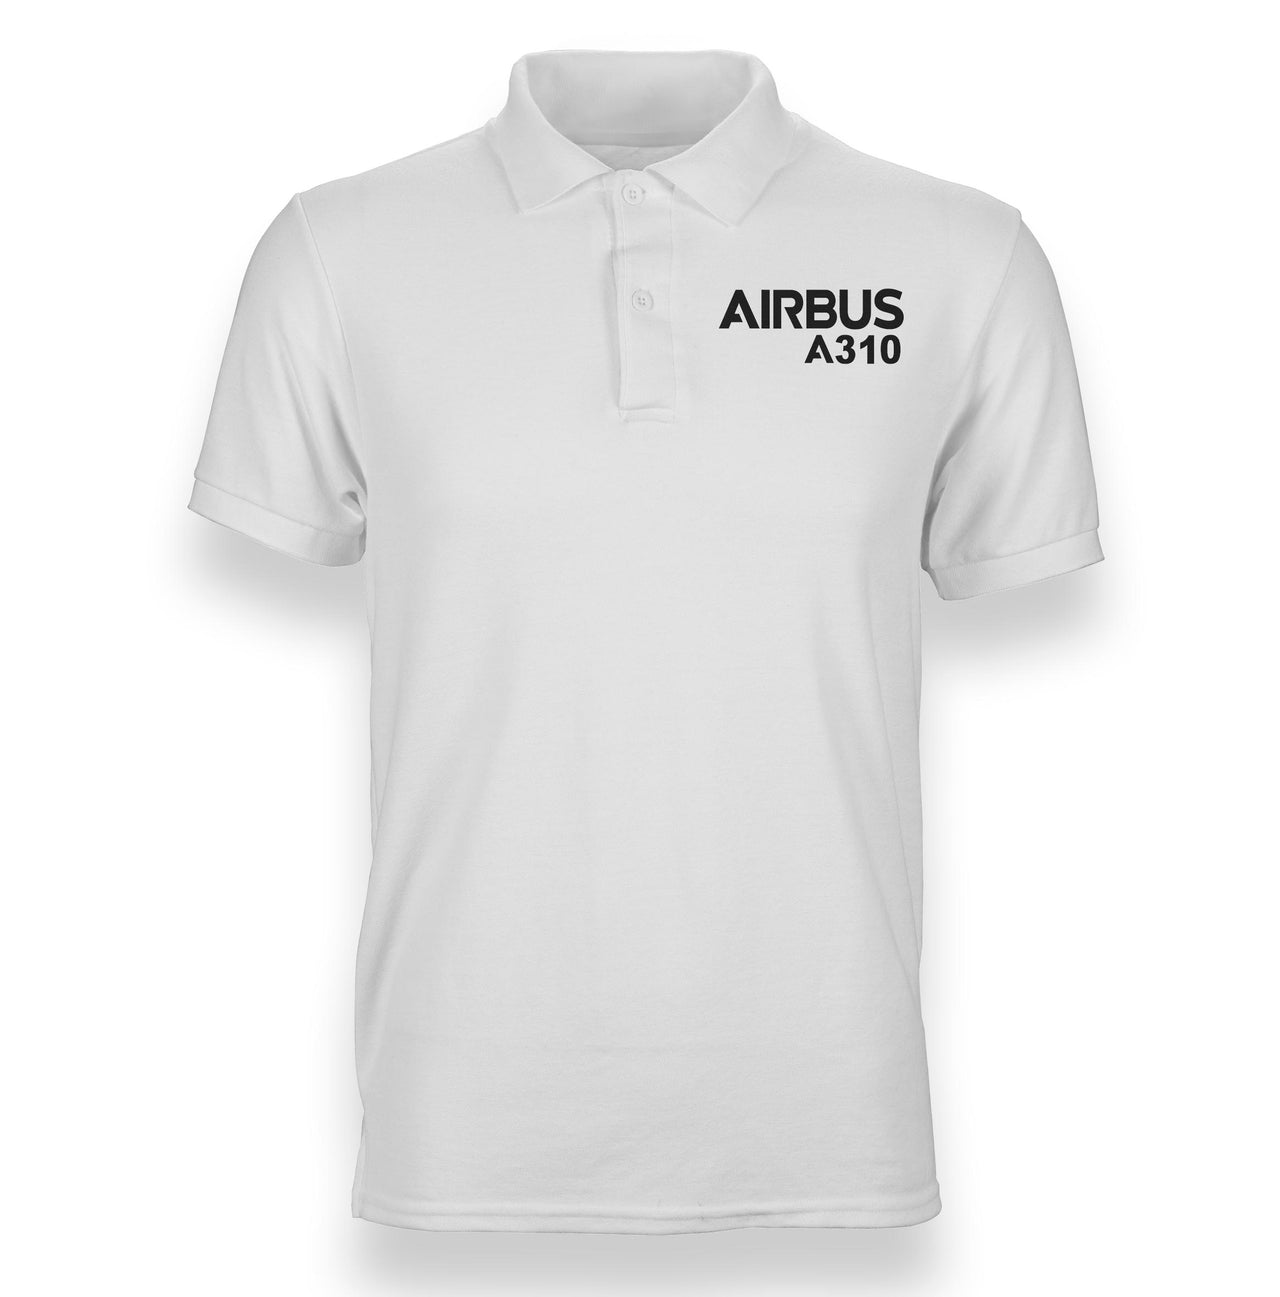 Airbus A310 & Text Designed Polo T-Shirts